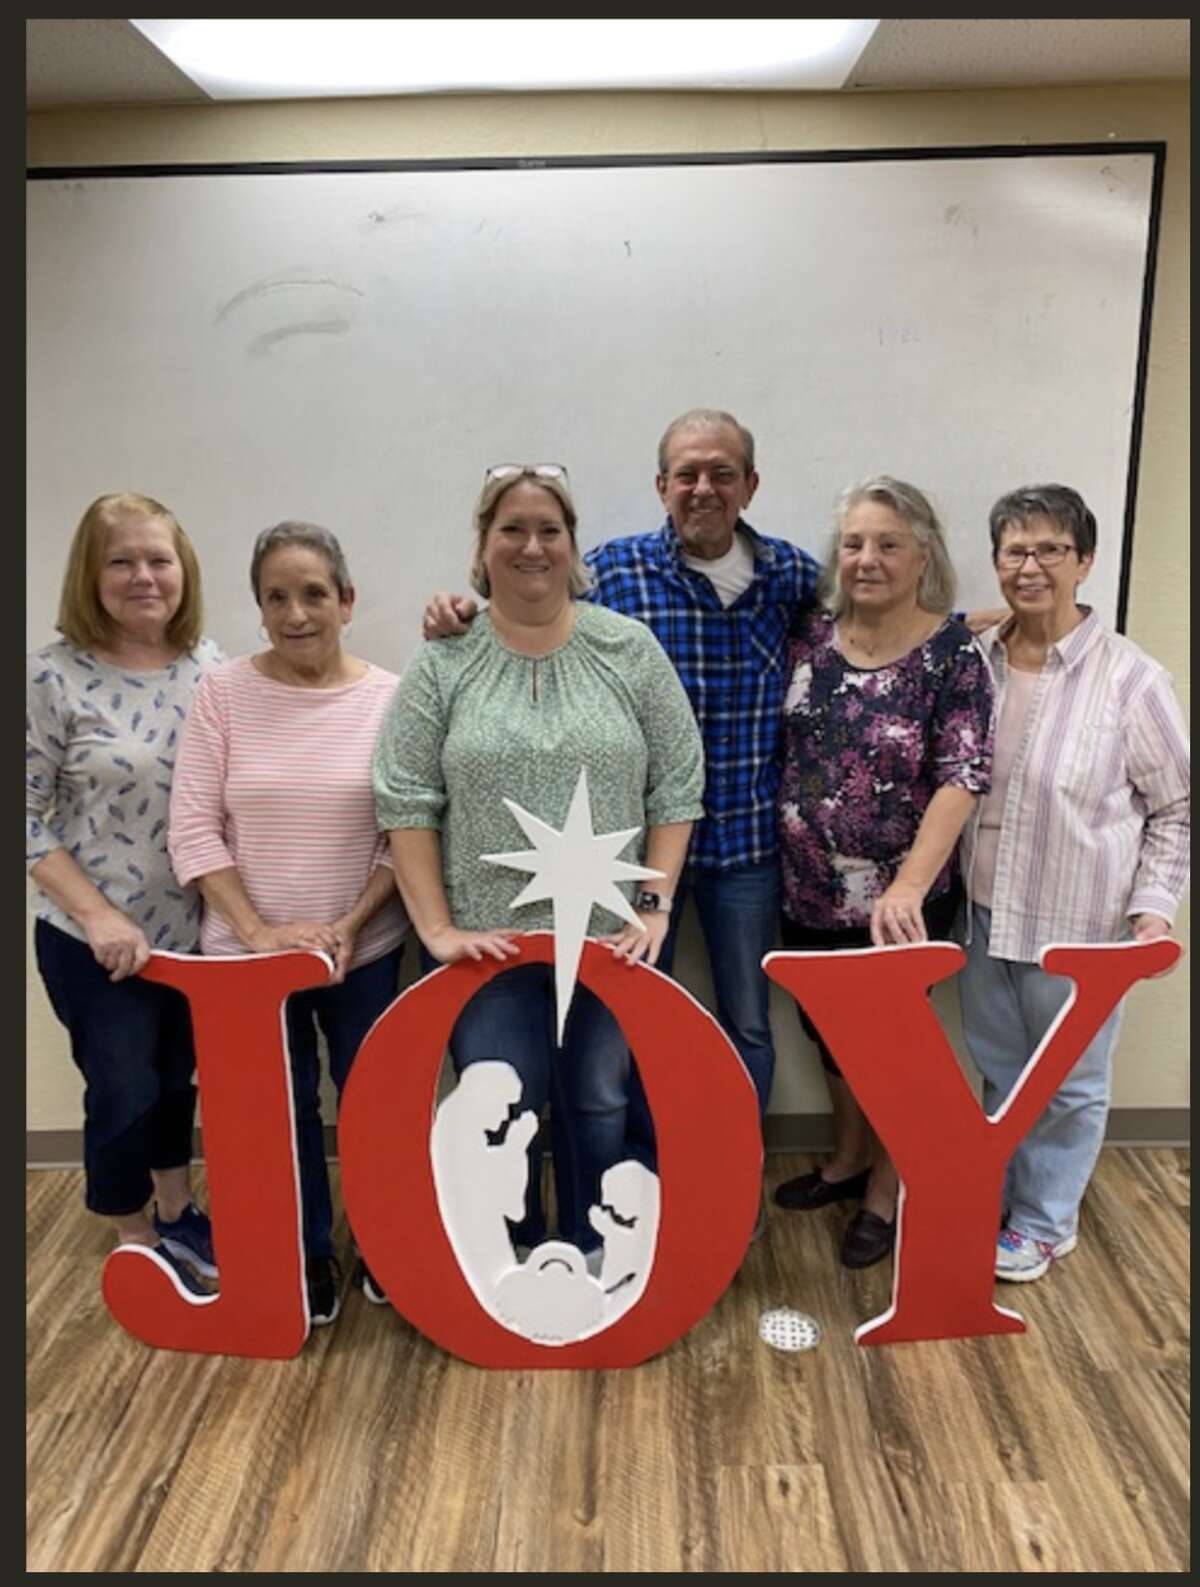 Looking forward to their Smorgasbord Dinner and Christmas Craft Bazaar at Our Lady Queen of Peace Catholic Church in Bethalto are the Planning Committee Members from Left to Right: Renee Harshbarger, Bea Albarado, Stacy Dooling, Ron Harshbarger, Fran Nappier and Dee Oller.